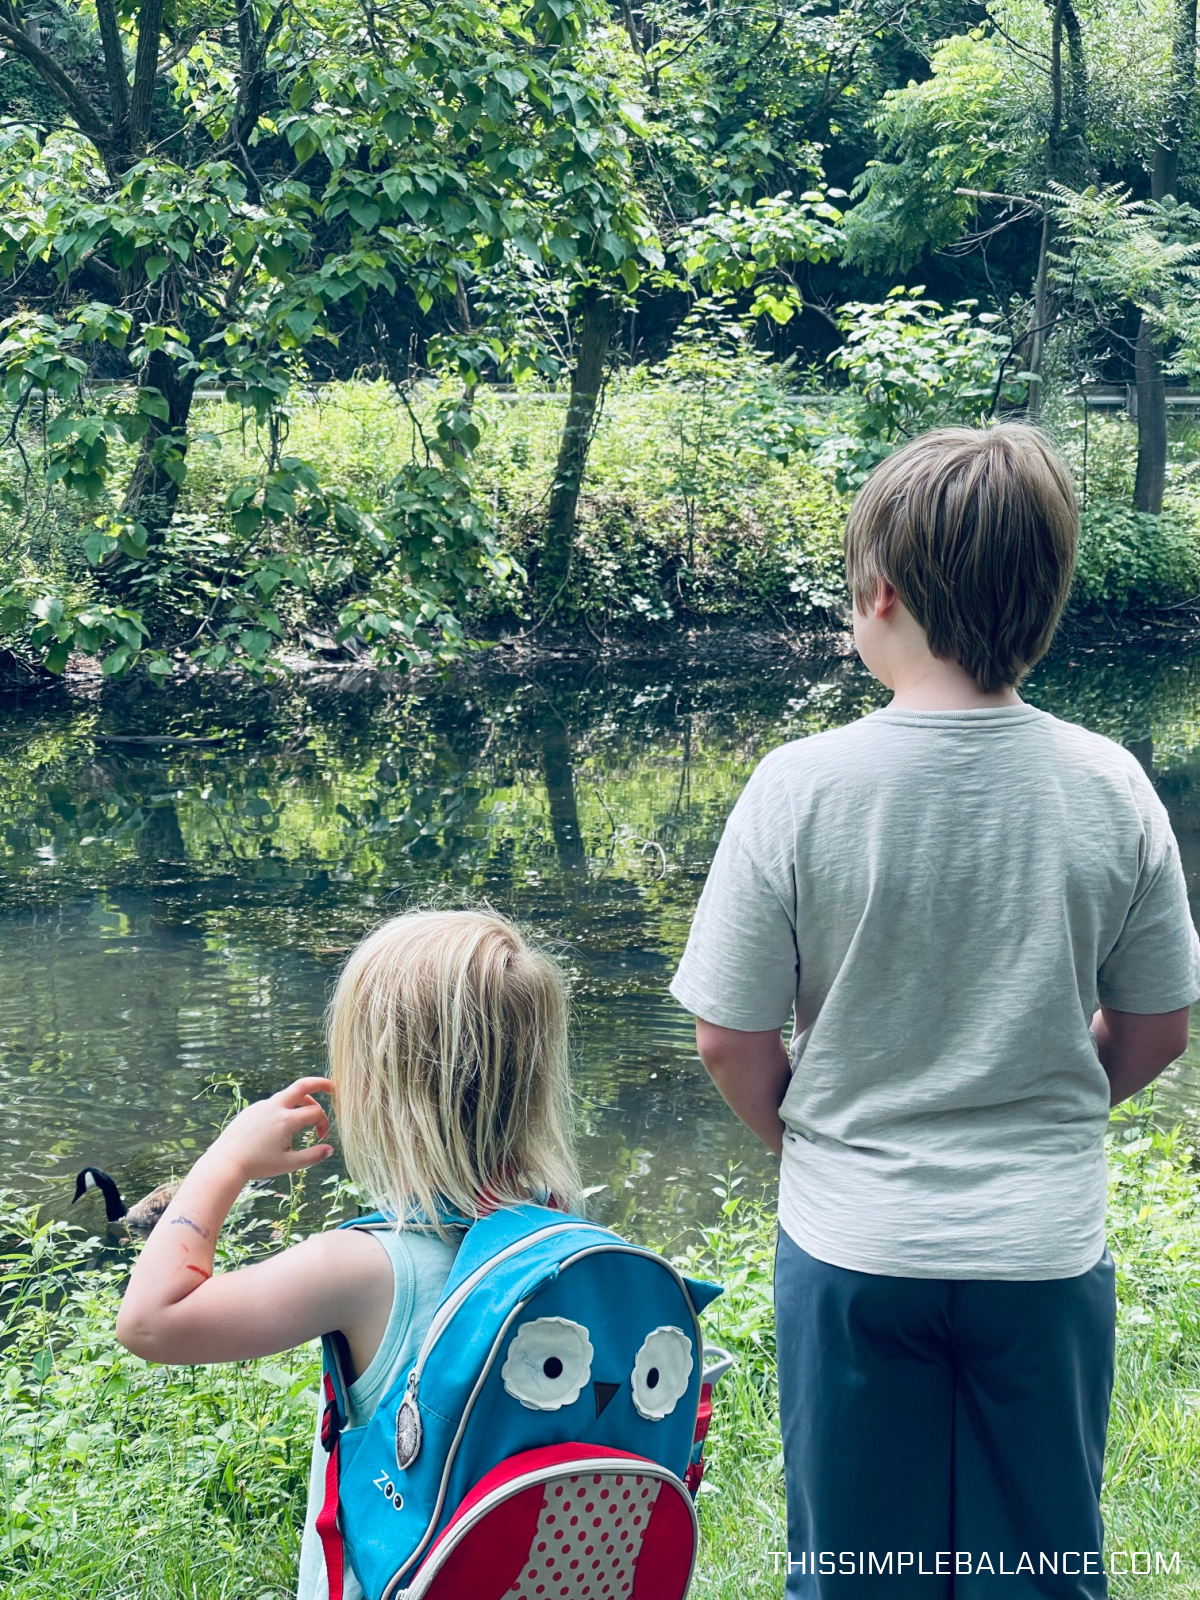 unschooled siblings on nature walk, looking at creatures in the canal.